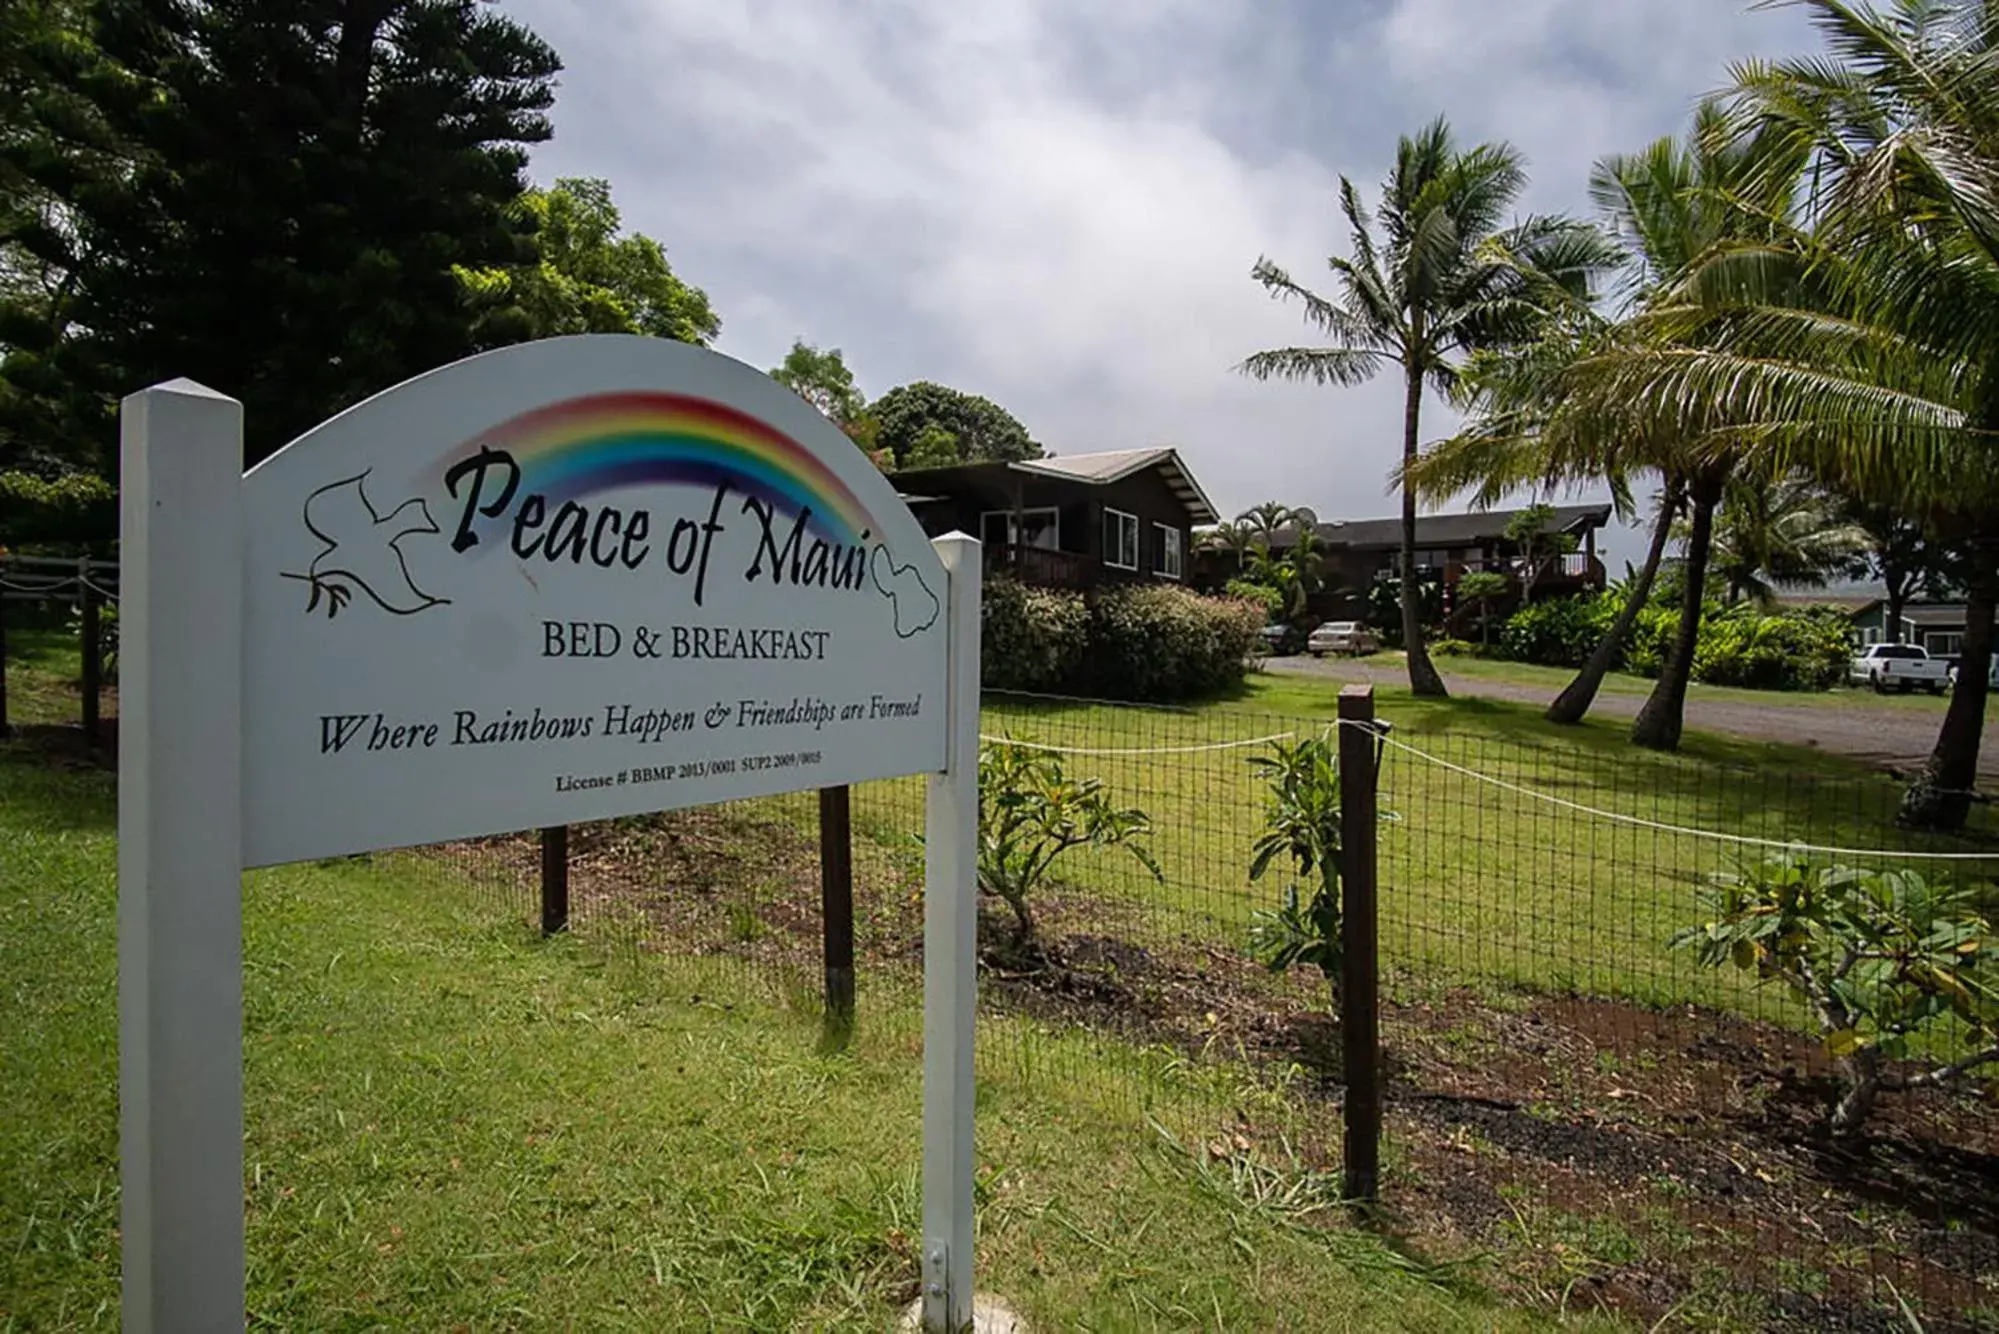 Property logo or sign in God's Peace of Maui